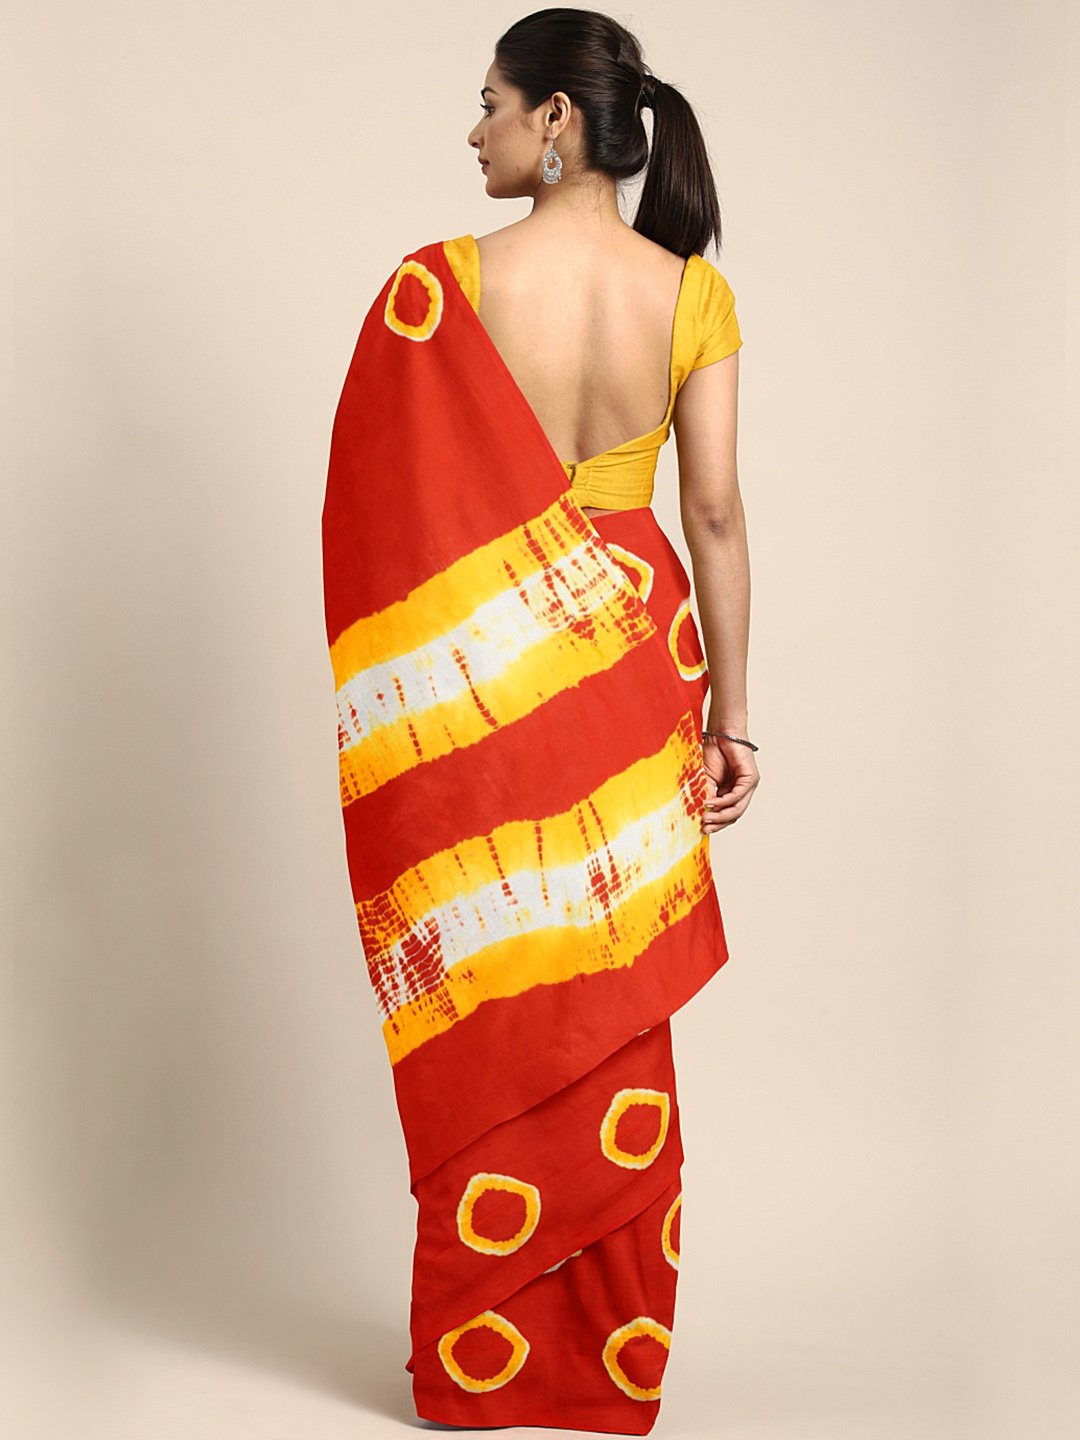 Red & Beige Tie & Dyed Handcrafted Cotton Saree-Saree-Kalakari India-BHKPSA0037-Cotton, Dabu, Geographical Indication, Hand Blocks, Hand Crafted, Heritage Prints, Indigo, Natural Dyes, Sarees, Sustainable Fabrics-[Linen,Ethnic,wear,Fashionista,Handloom,Handicraft,Indigo,blockprint,block,print,Cotton,Chanderi,Blue, latest,classy,party,bollywood,trendy,summer,style,traditional,formal,elegant,unique,style,hand,block,print, dabu,booti,gift,present,glamorous,affordable,collectible,Sari,Saree,printed,